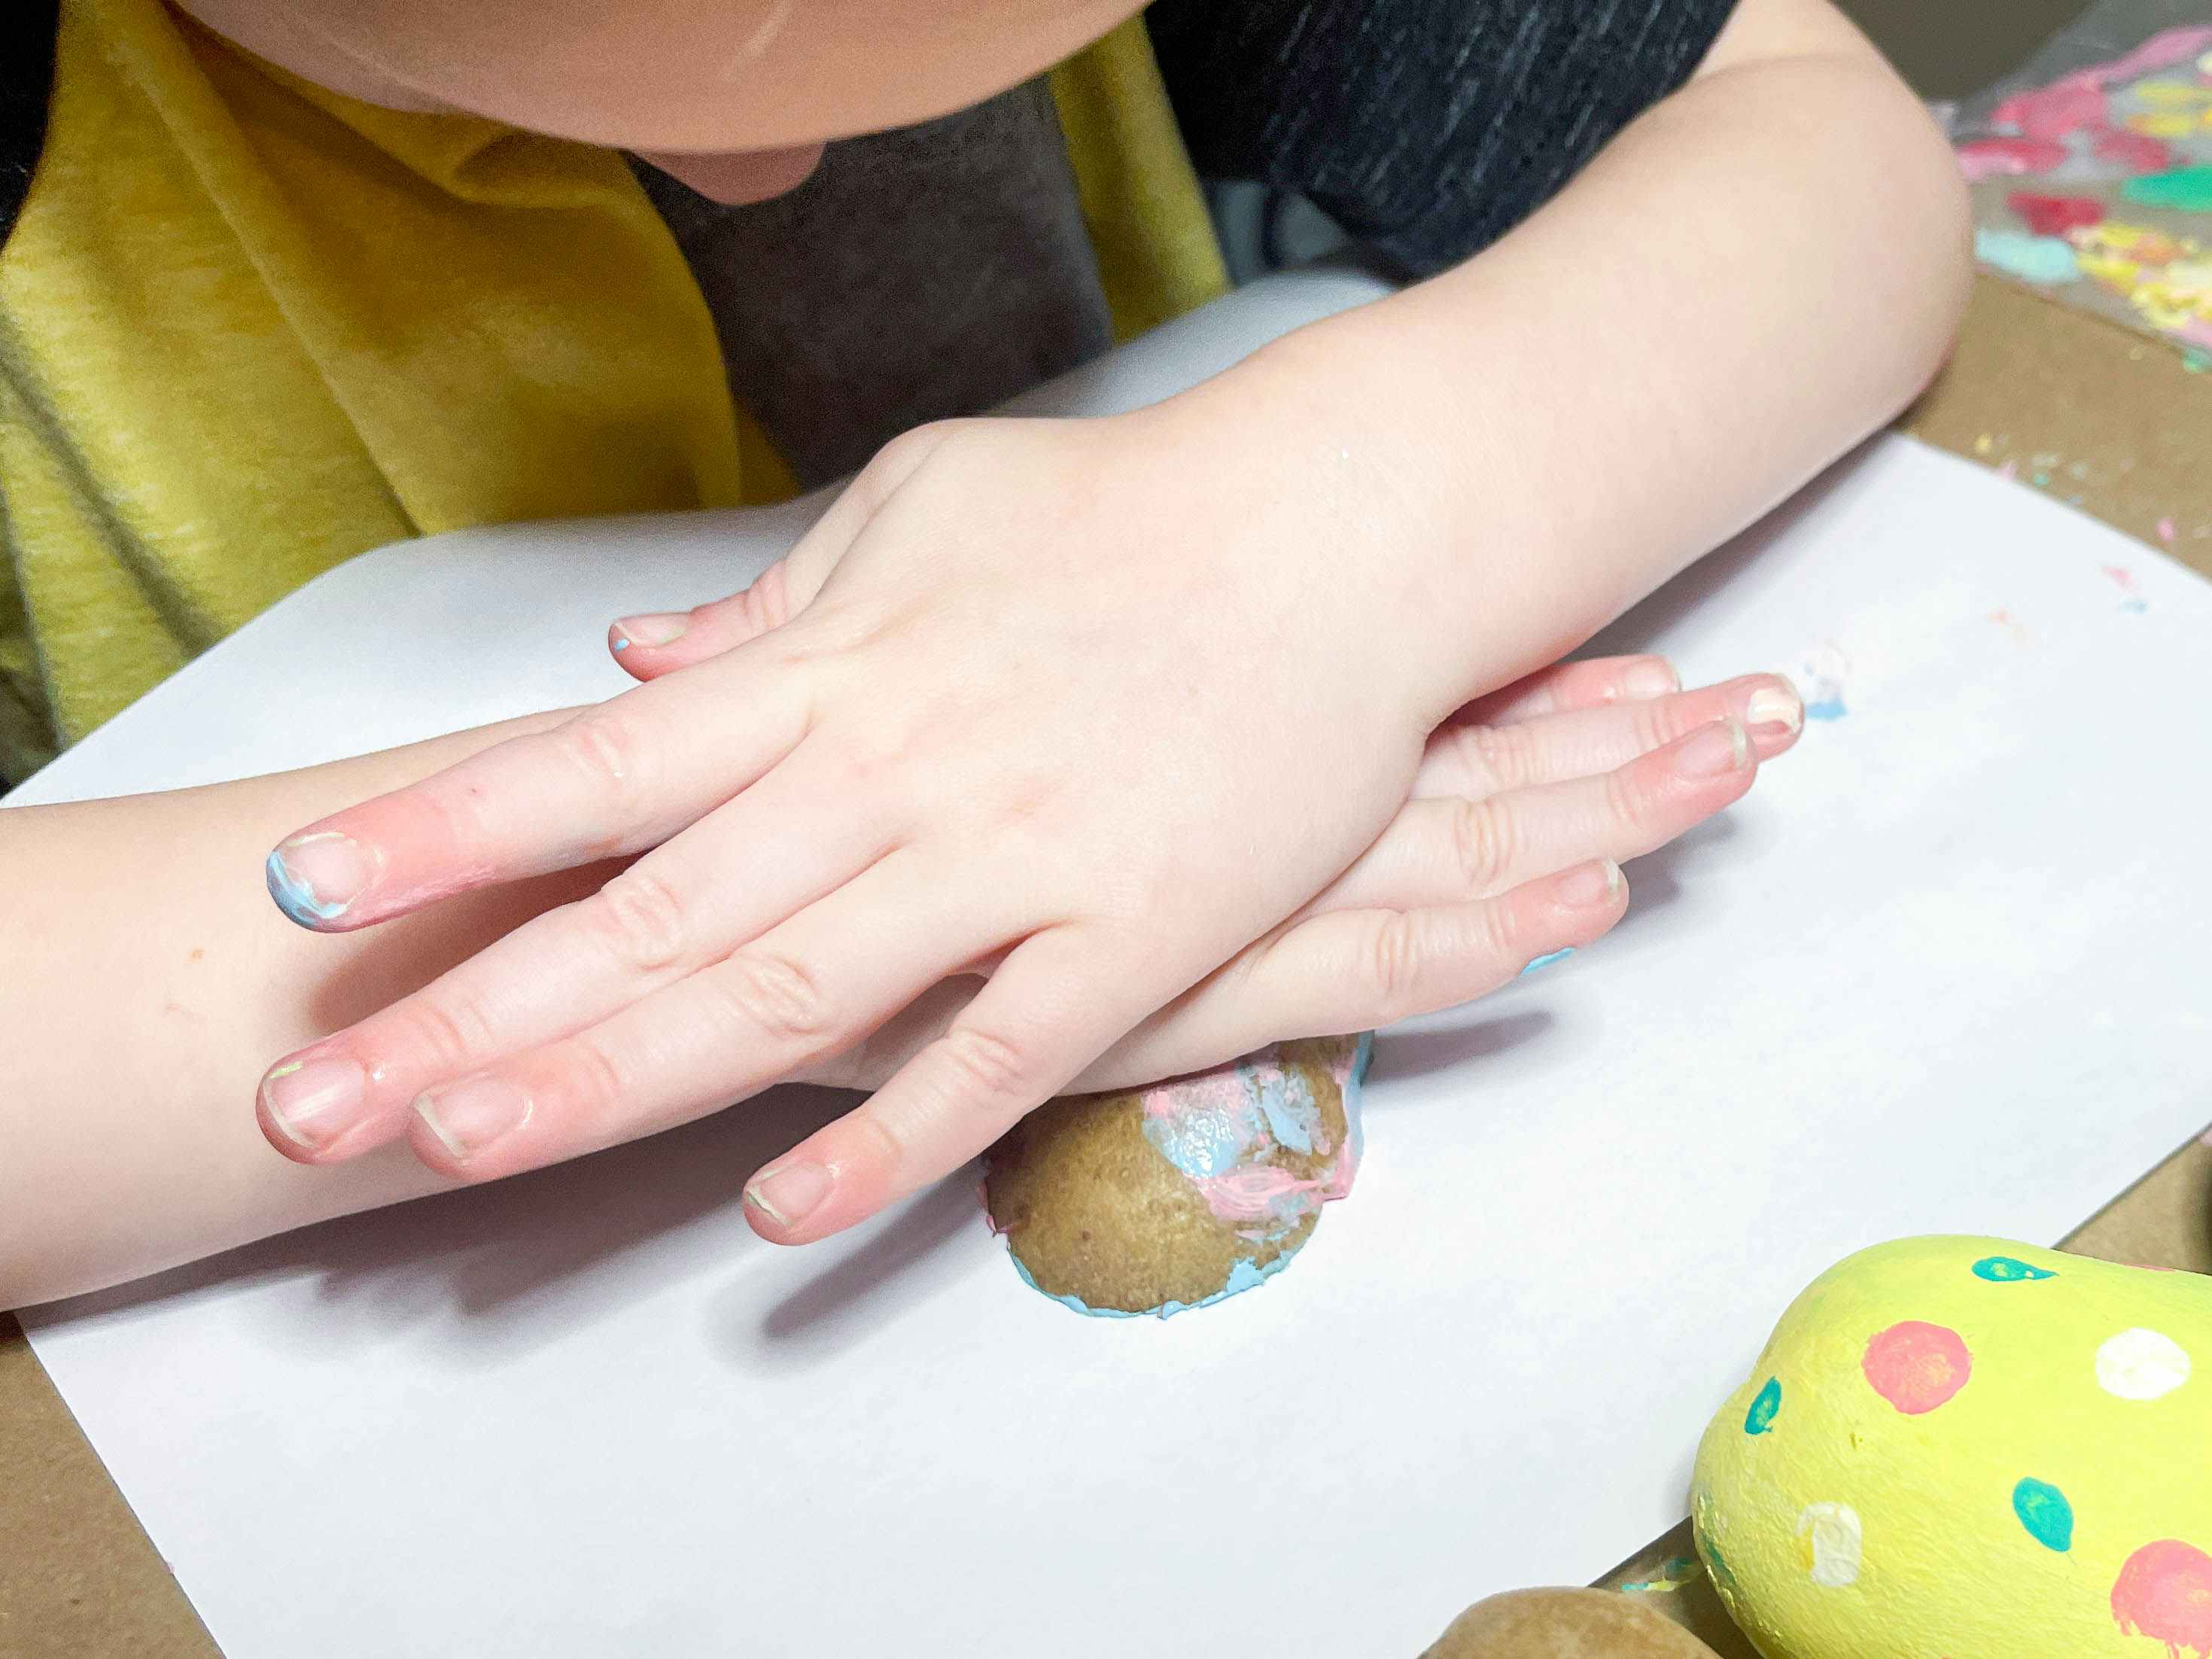 a kid pressing a painted potato stamp